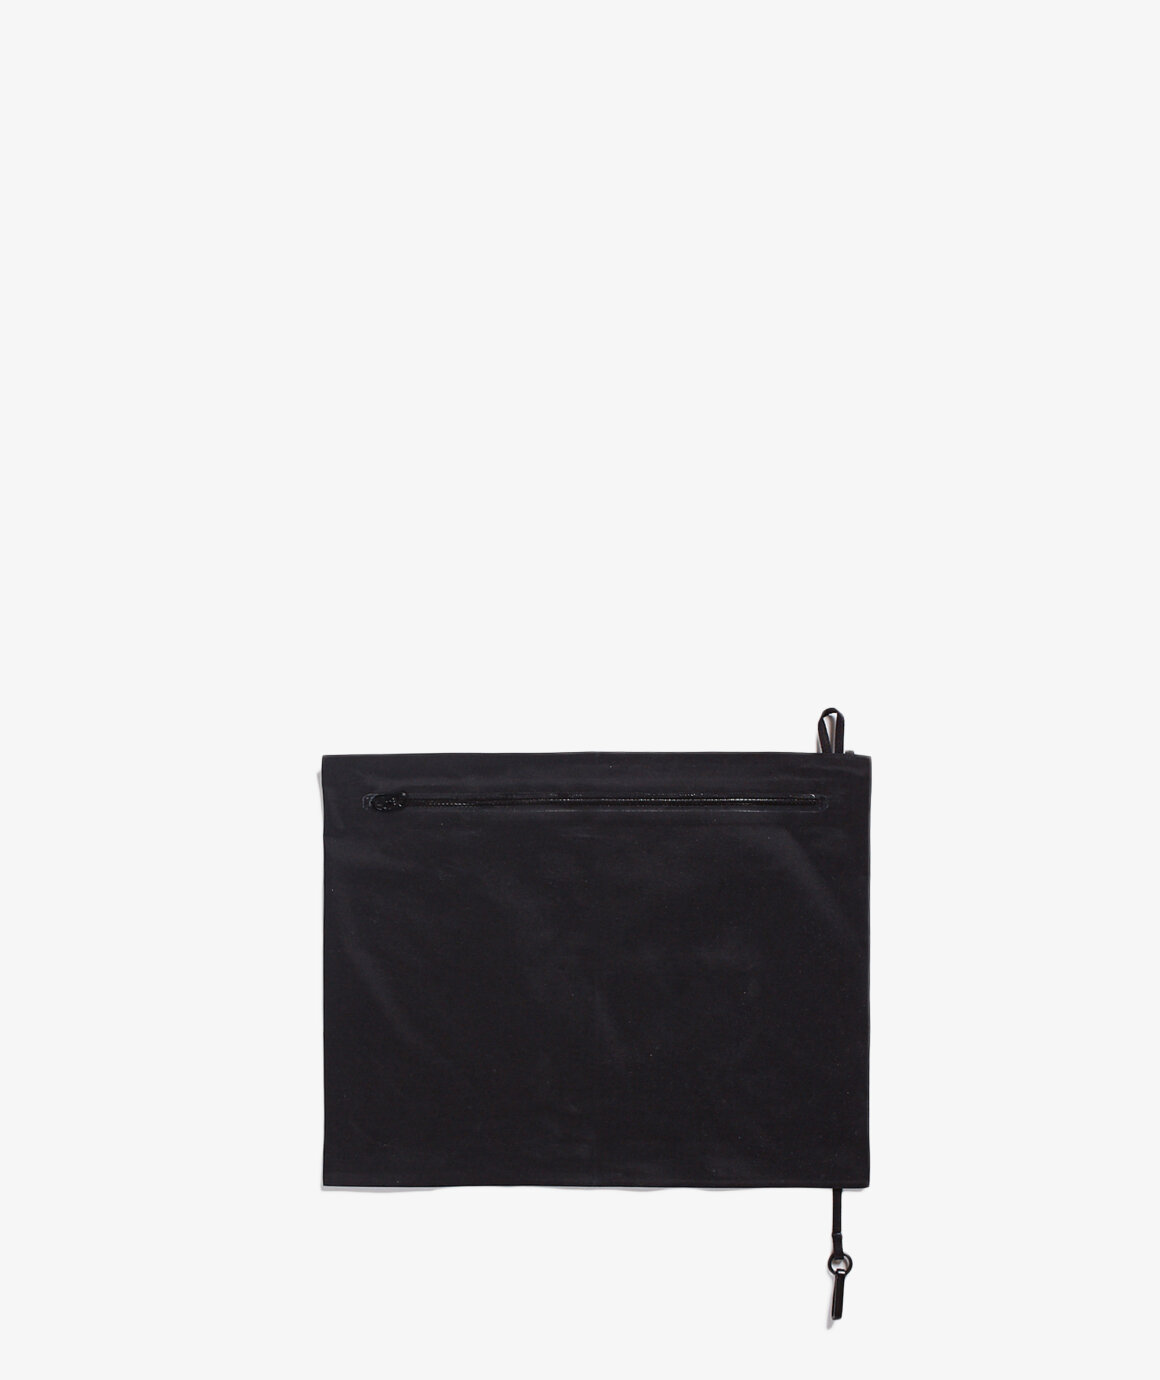 Norse Store | Shipping Worldwide - Veilance, Monad Re-System Pouch - Black